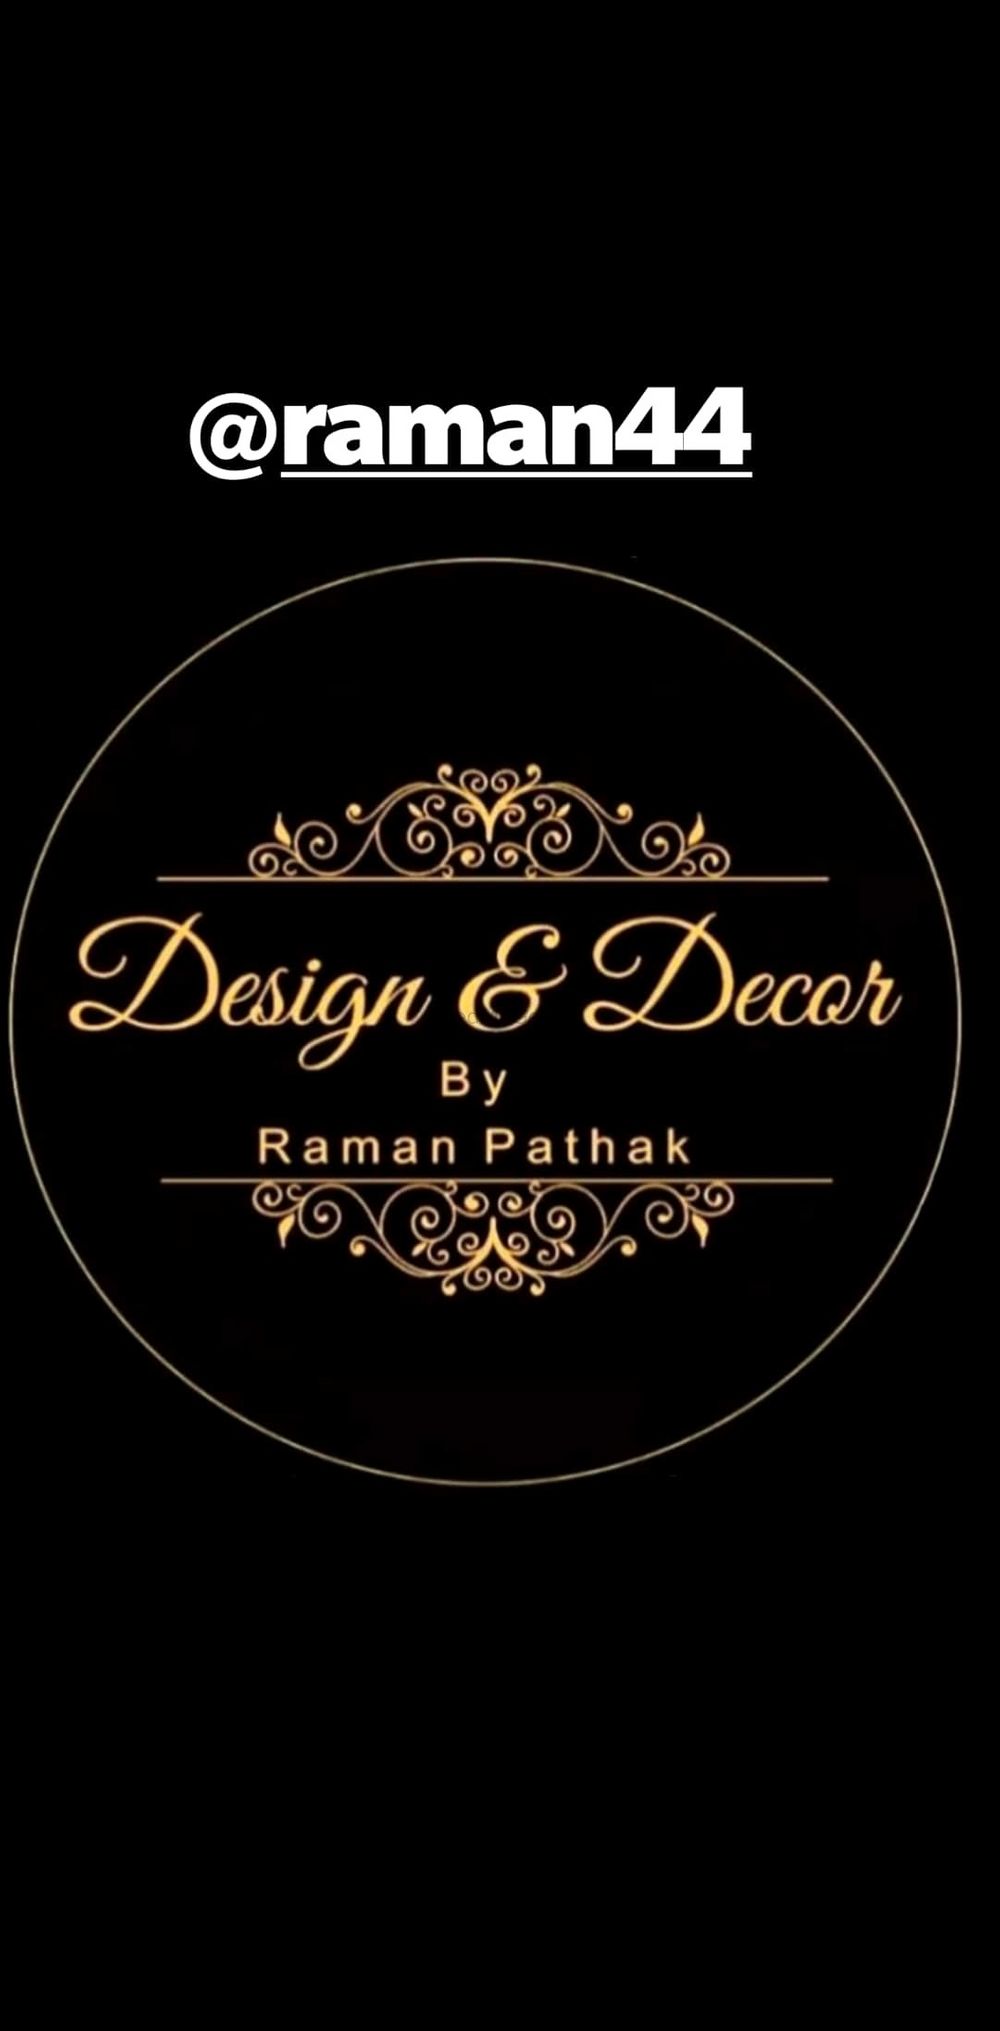 Photo From Destination Decor - By Design & Decor by Raman Pathak